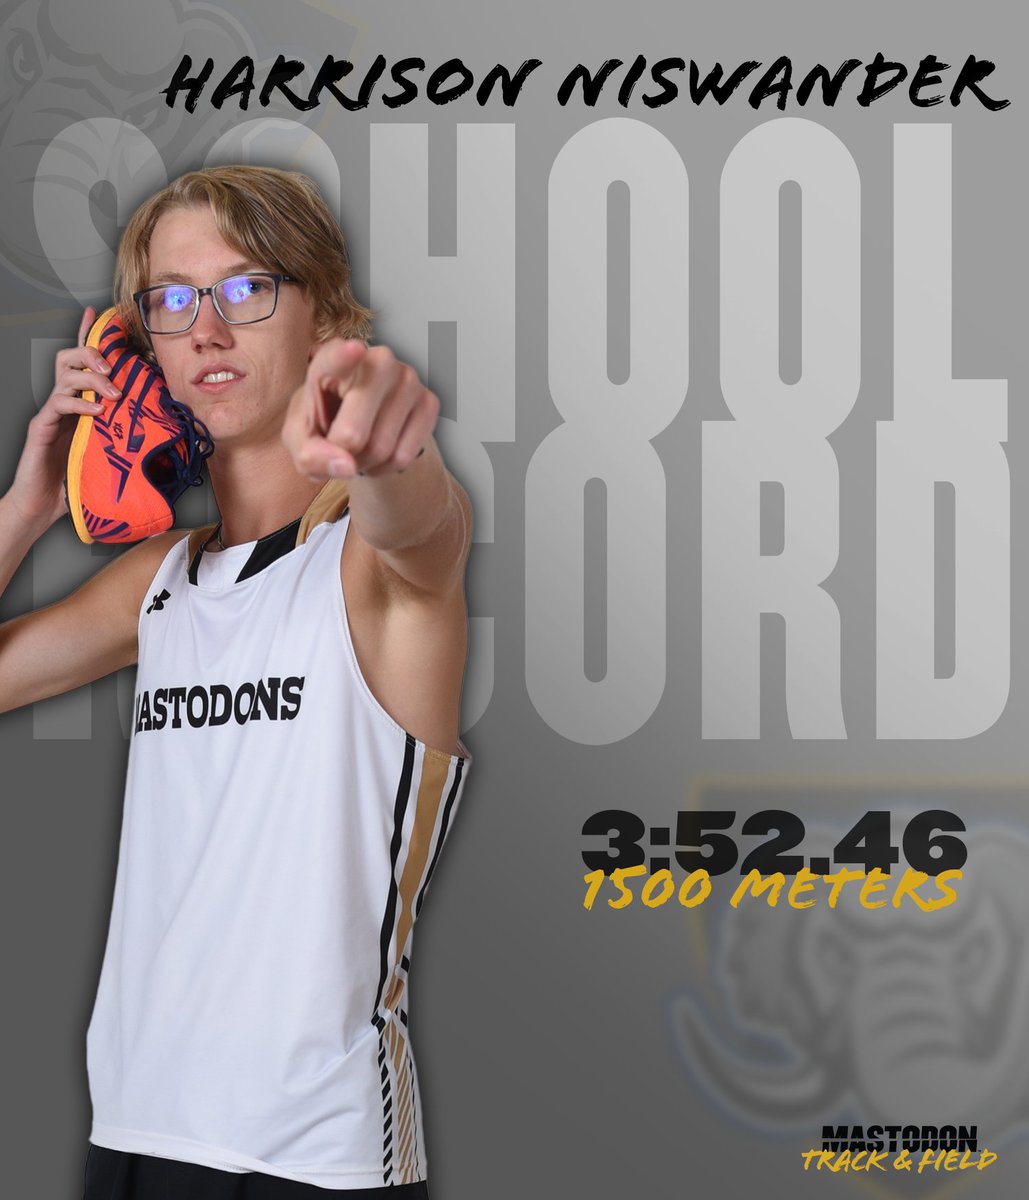 Harrison Niswander with school record today in the 1500 at Indiana State!

#FeelTheRumble #HLTF